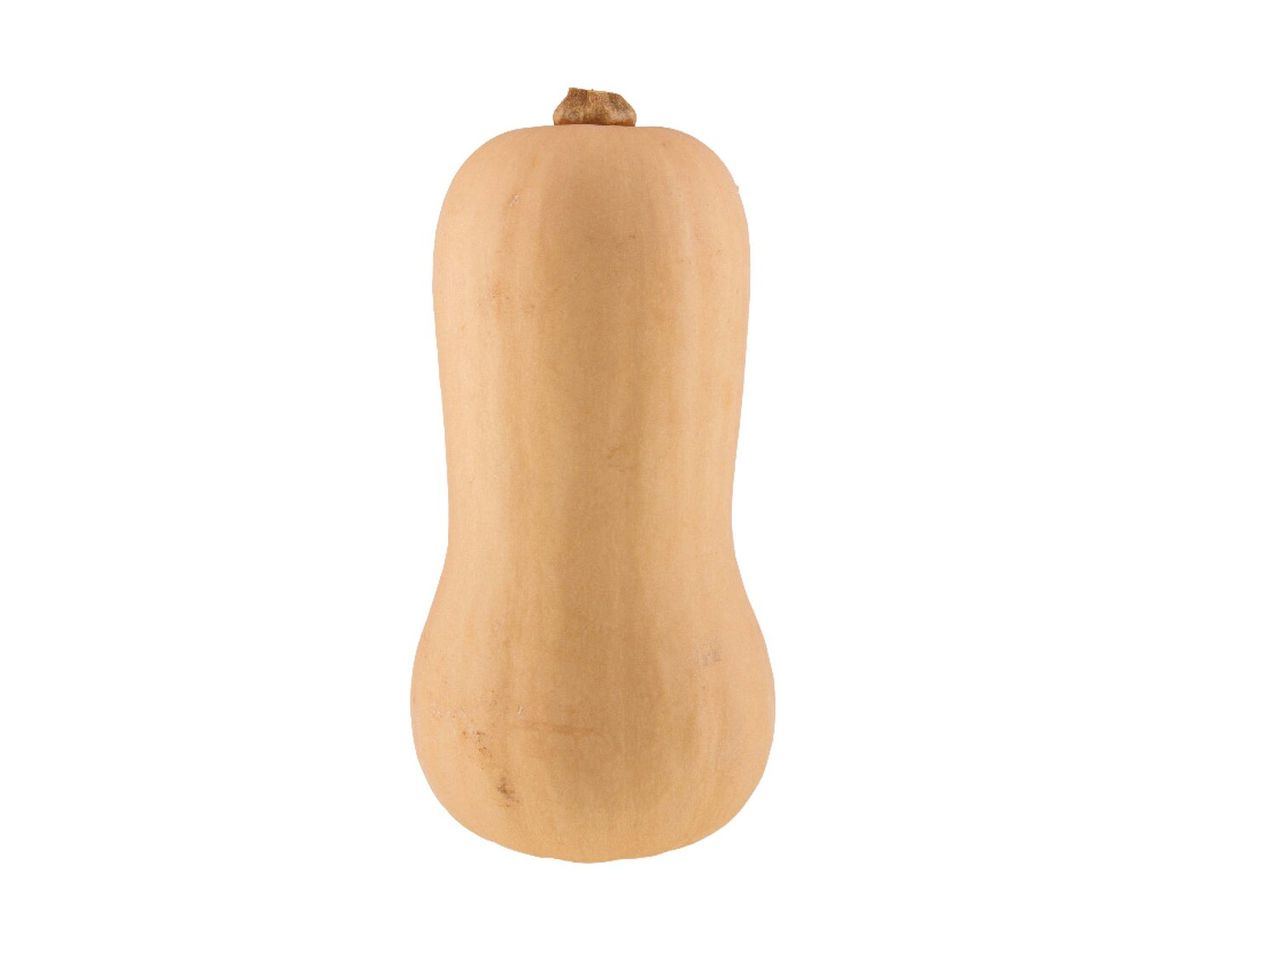 Go to full screen view: Butternut Squash - Image 1